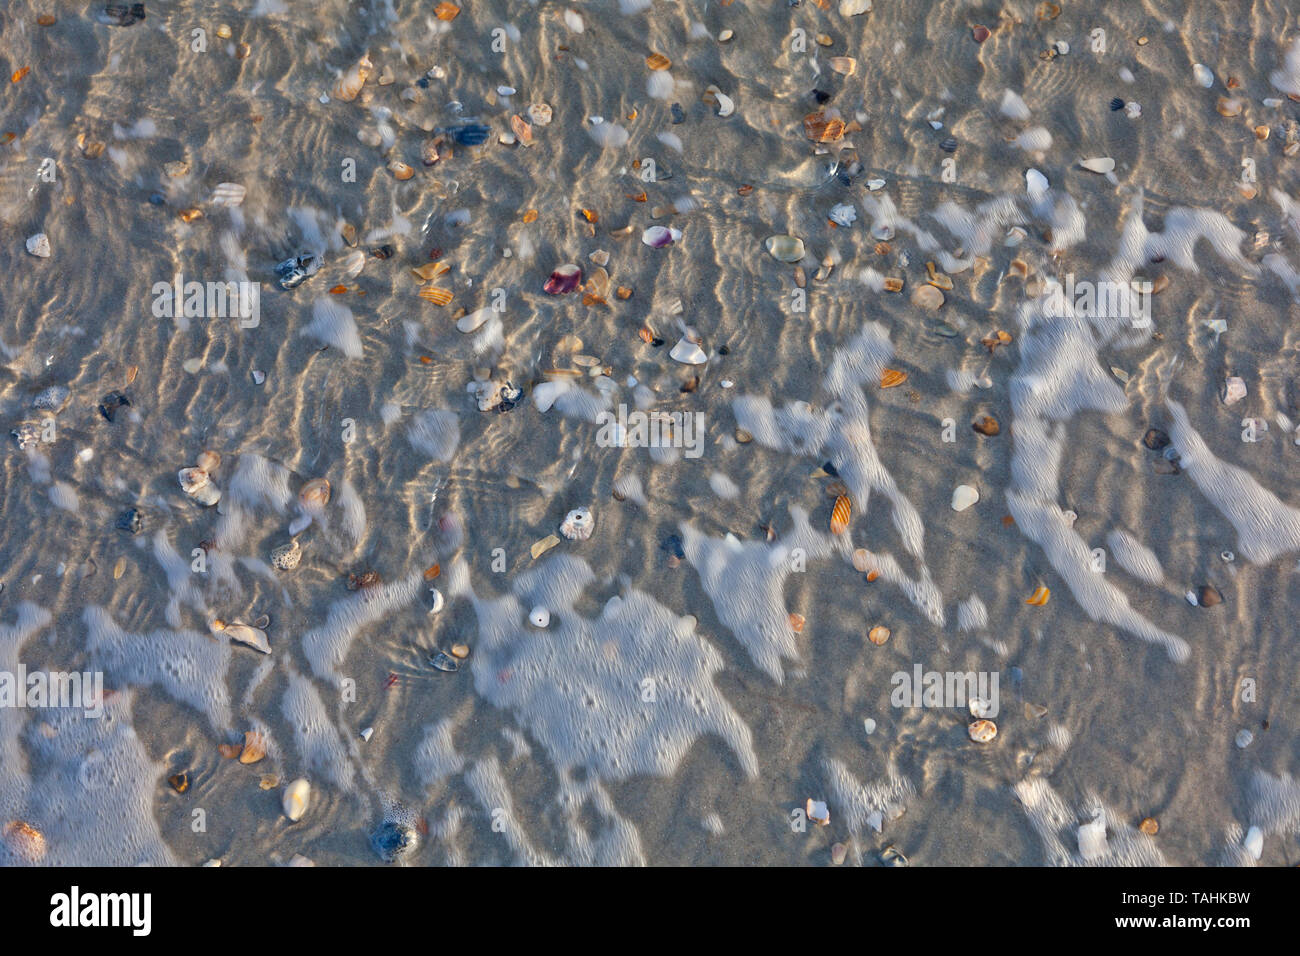 Broken shells and other items in the shallow water of a seashore Stock Photo